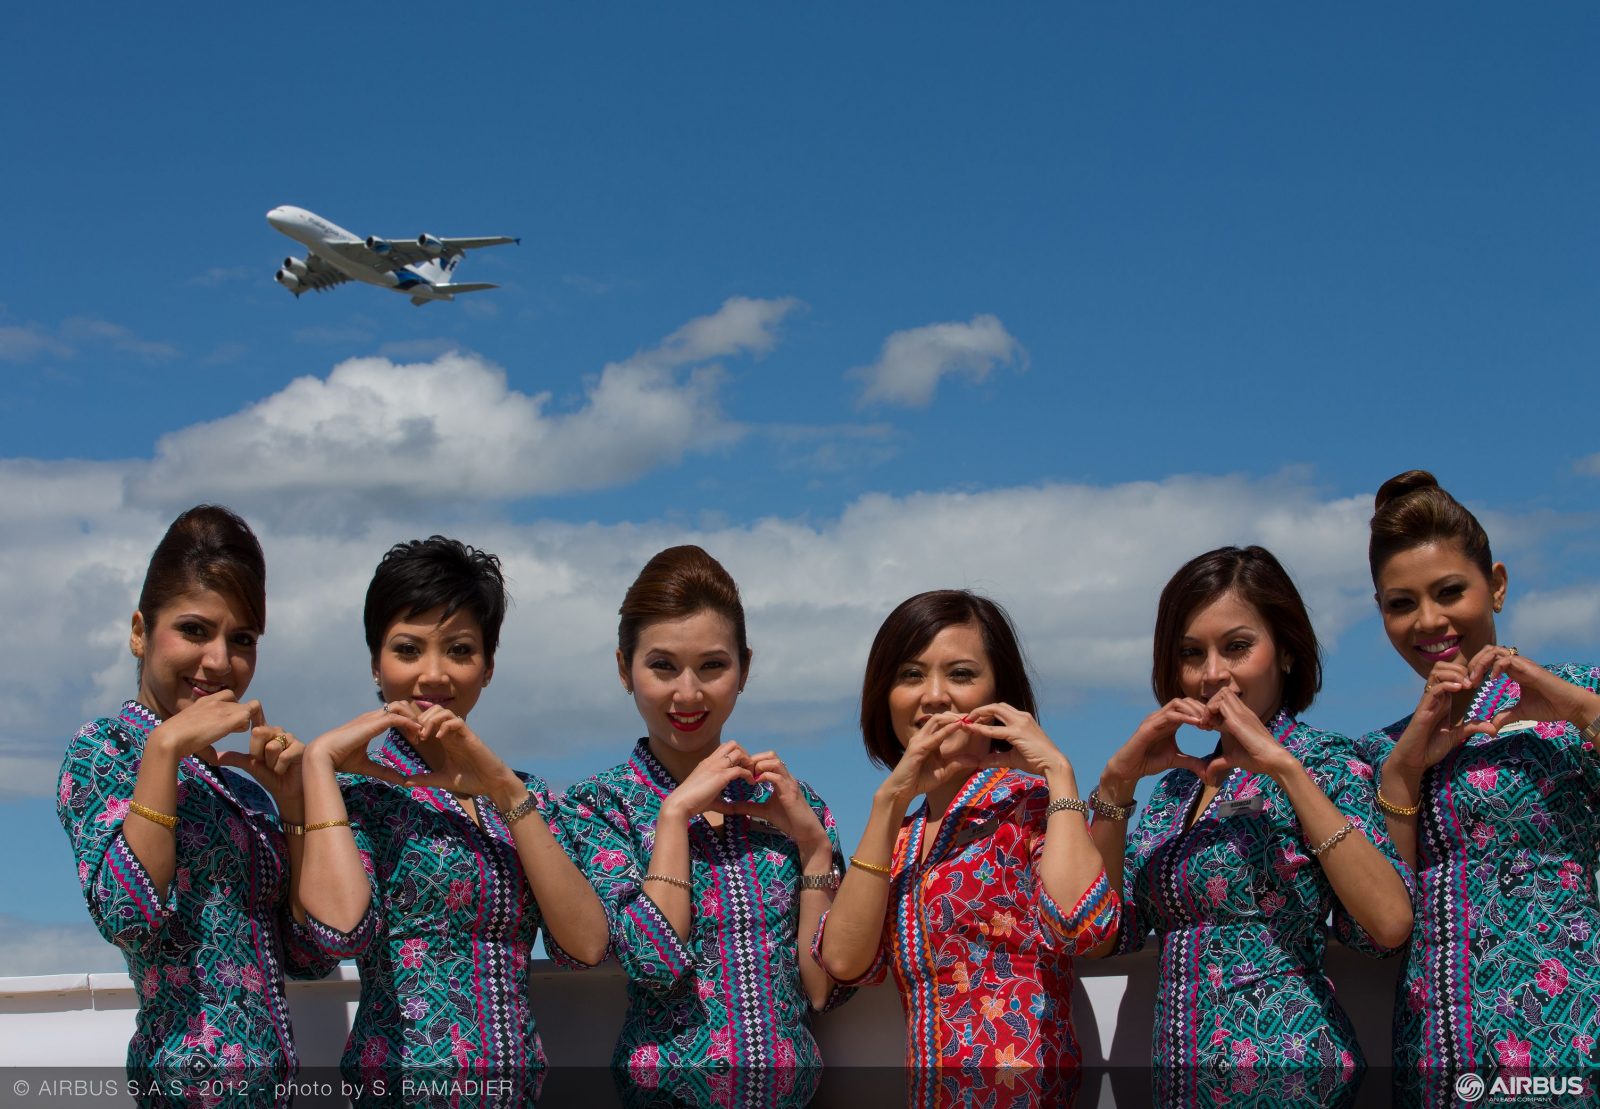 Malaysia Airlines Is Recruiting Cabin Crew And For Once They Are Hiring Males As Well